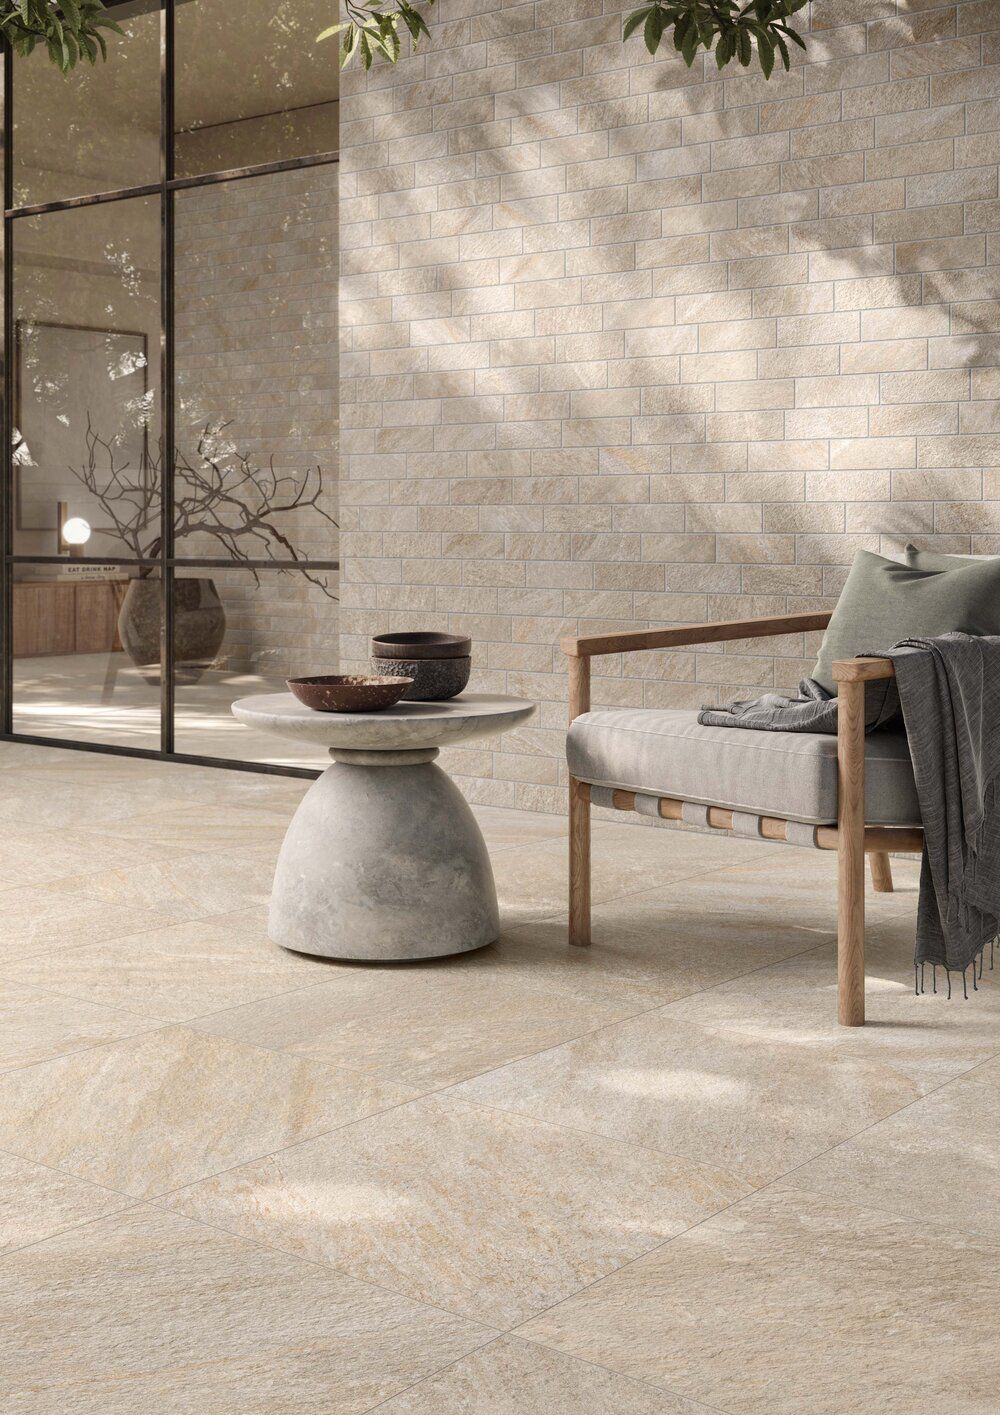 Artistry Underfoot: Inspiring Wall Tiles Designs for Every Room